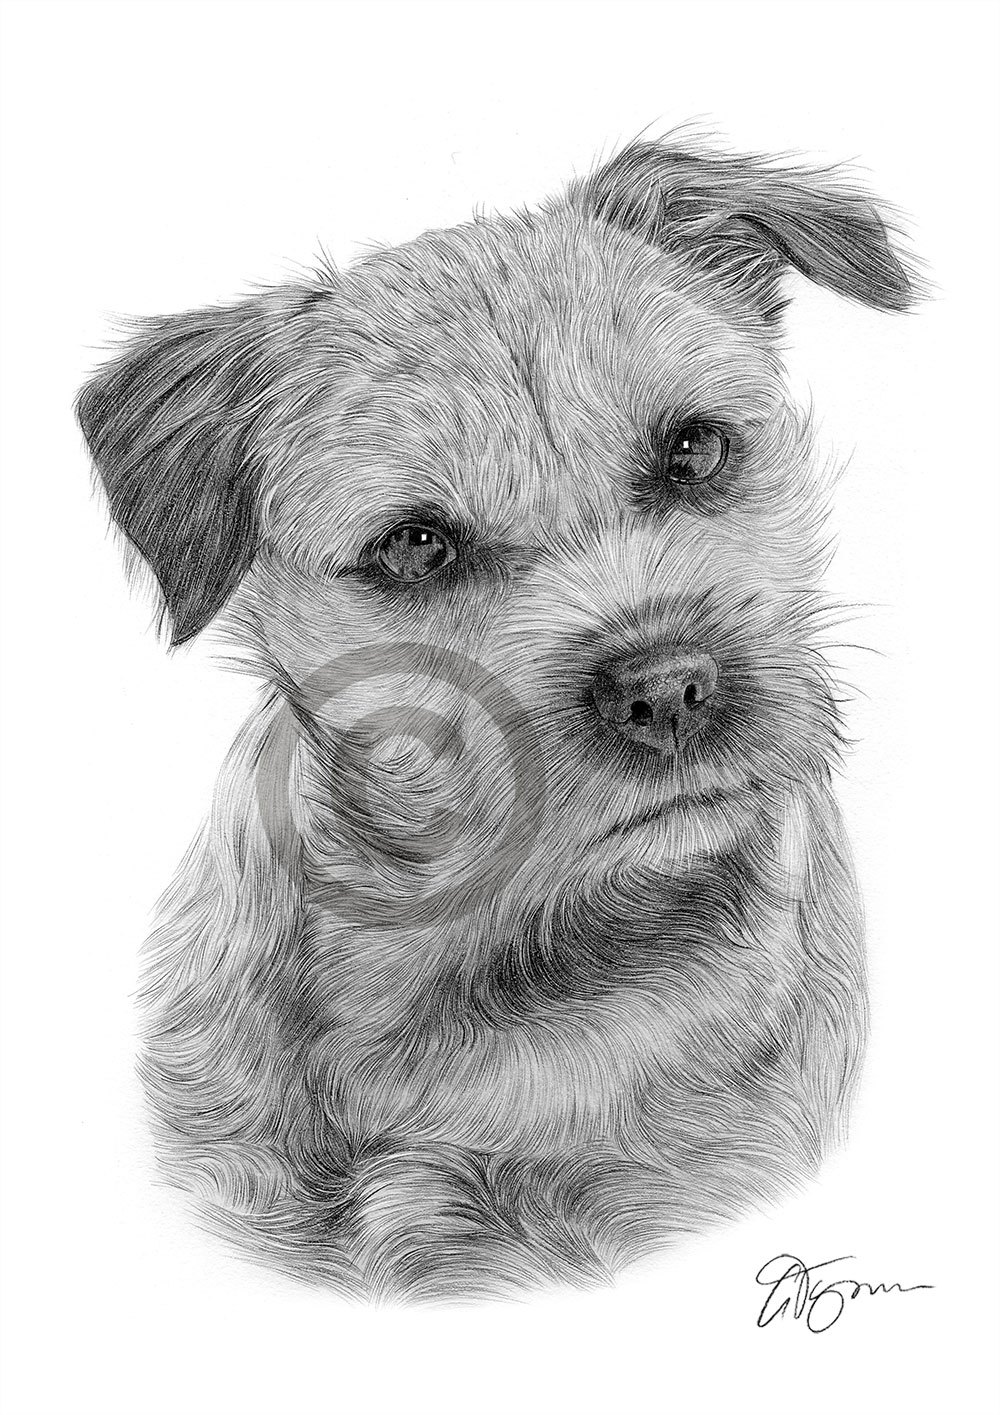 Pencil drawing of a border terrier by artist Gary Tymon